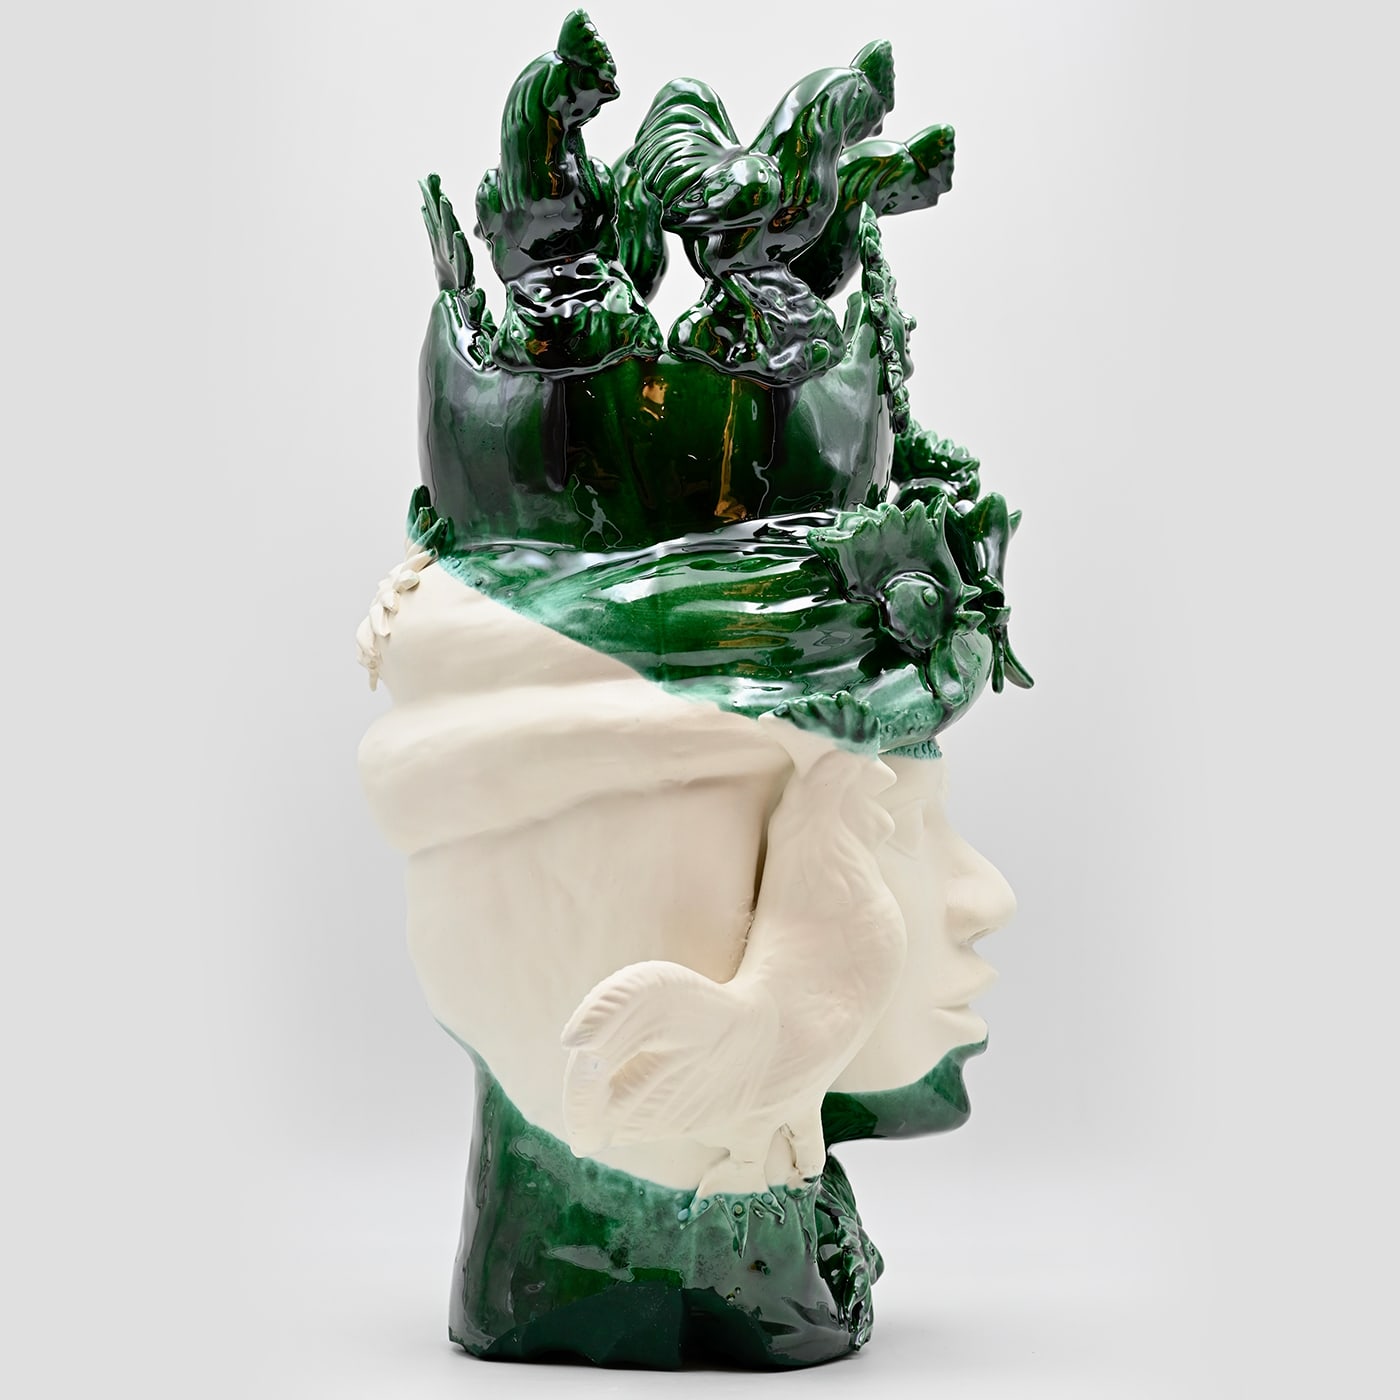 Unique Green and White Moor's Head Sculpture Italian Crafted